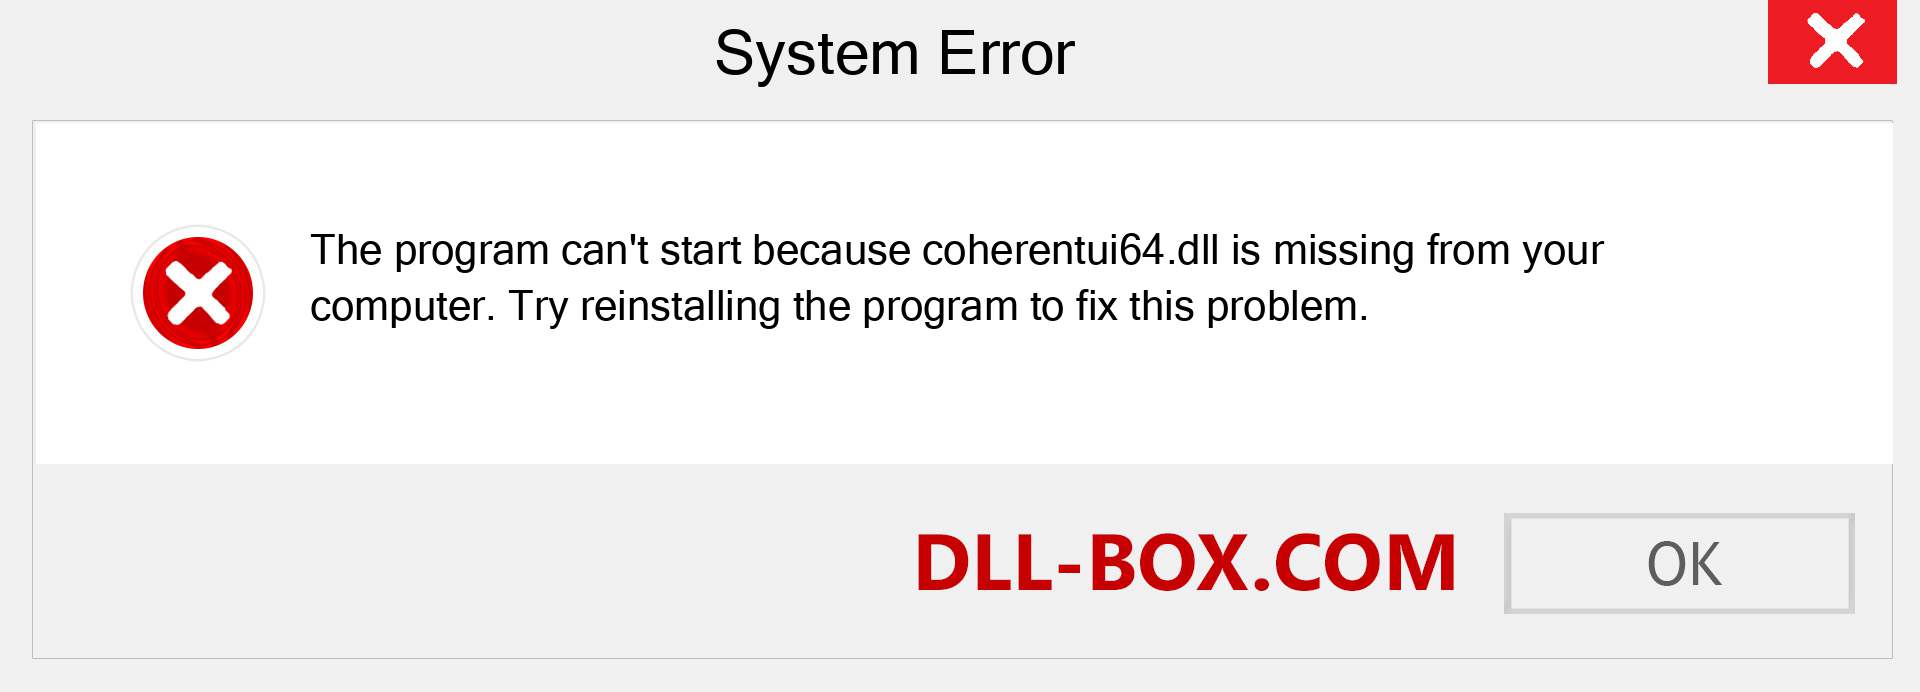  coherentui64.dll file is missing?. Download for Windows 7, 8, 10 - Fix  coherentui64 dll Missing Error on Windows, photos, images